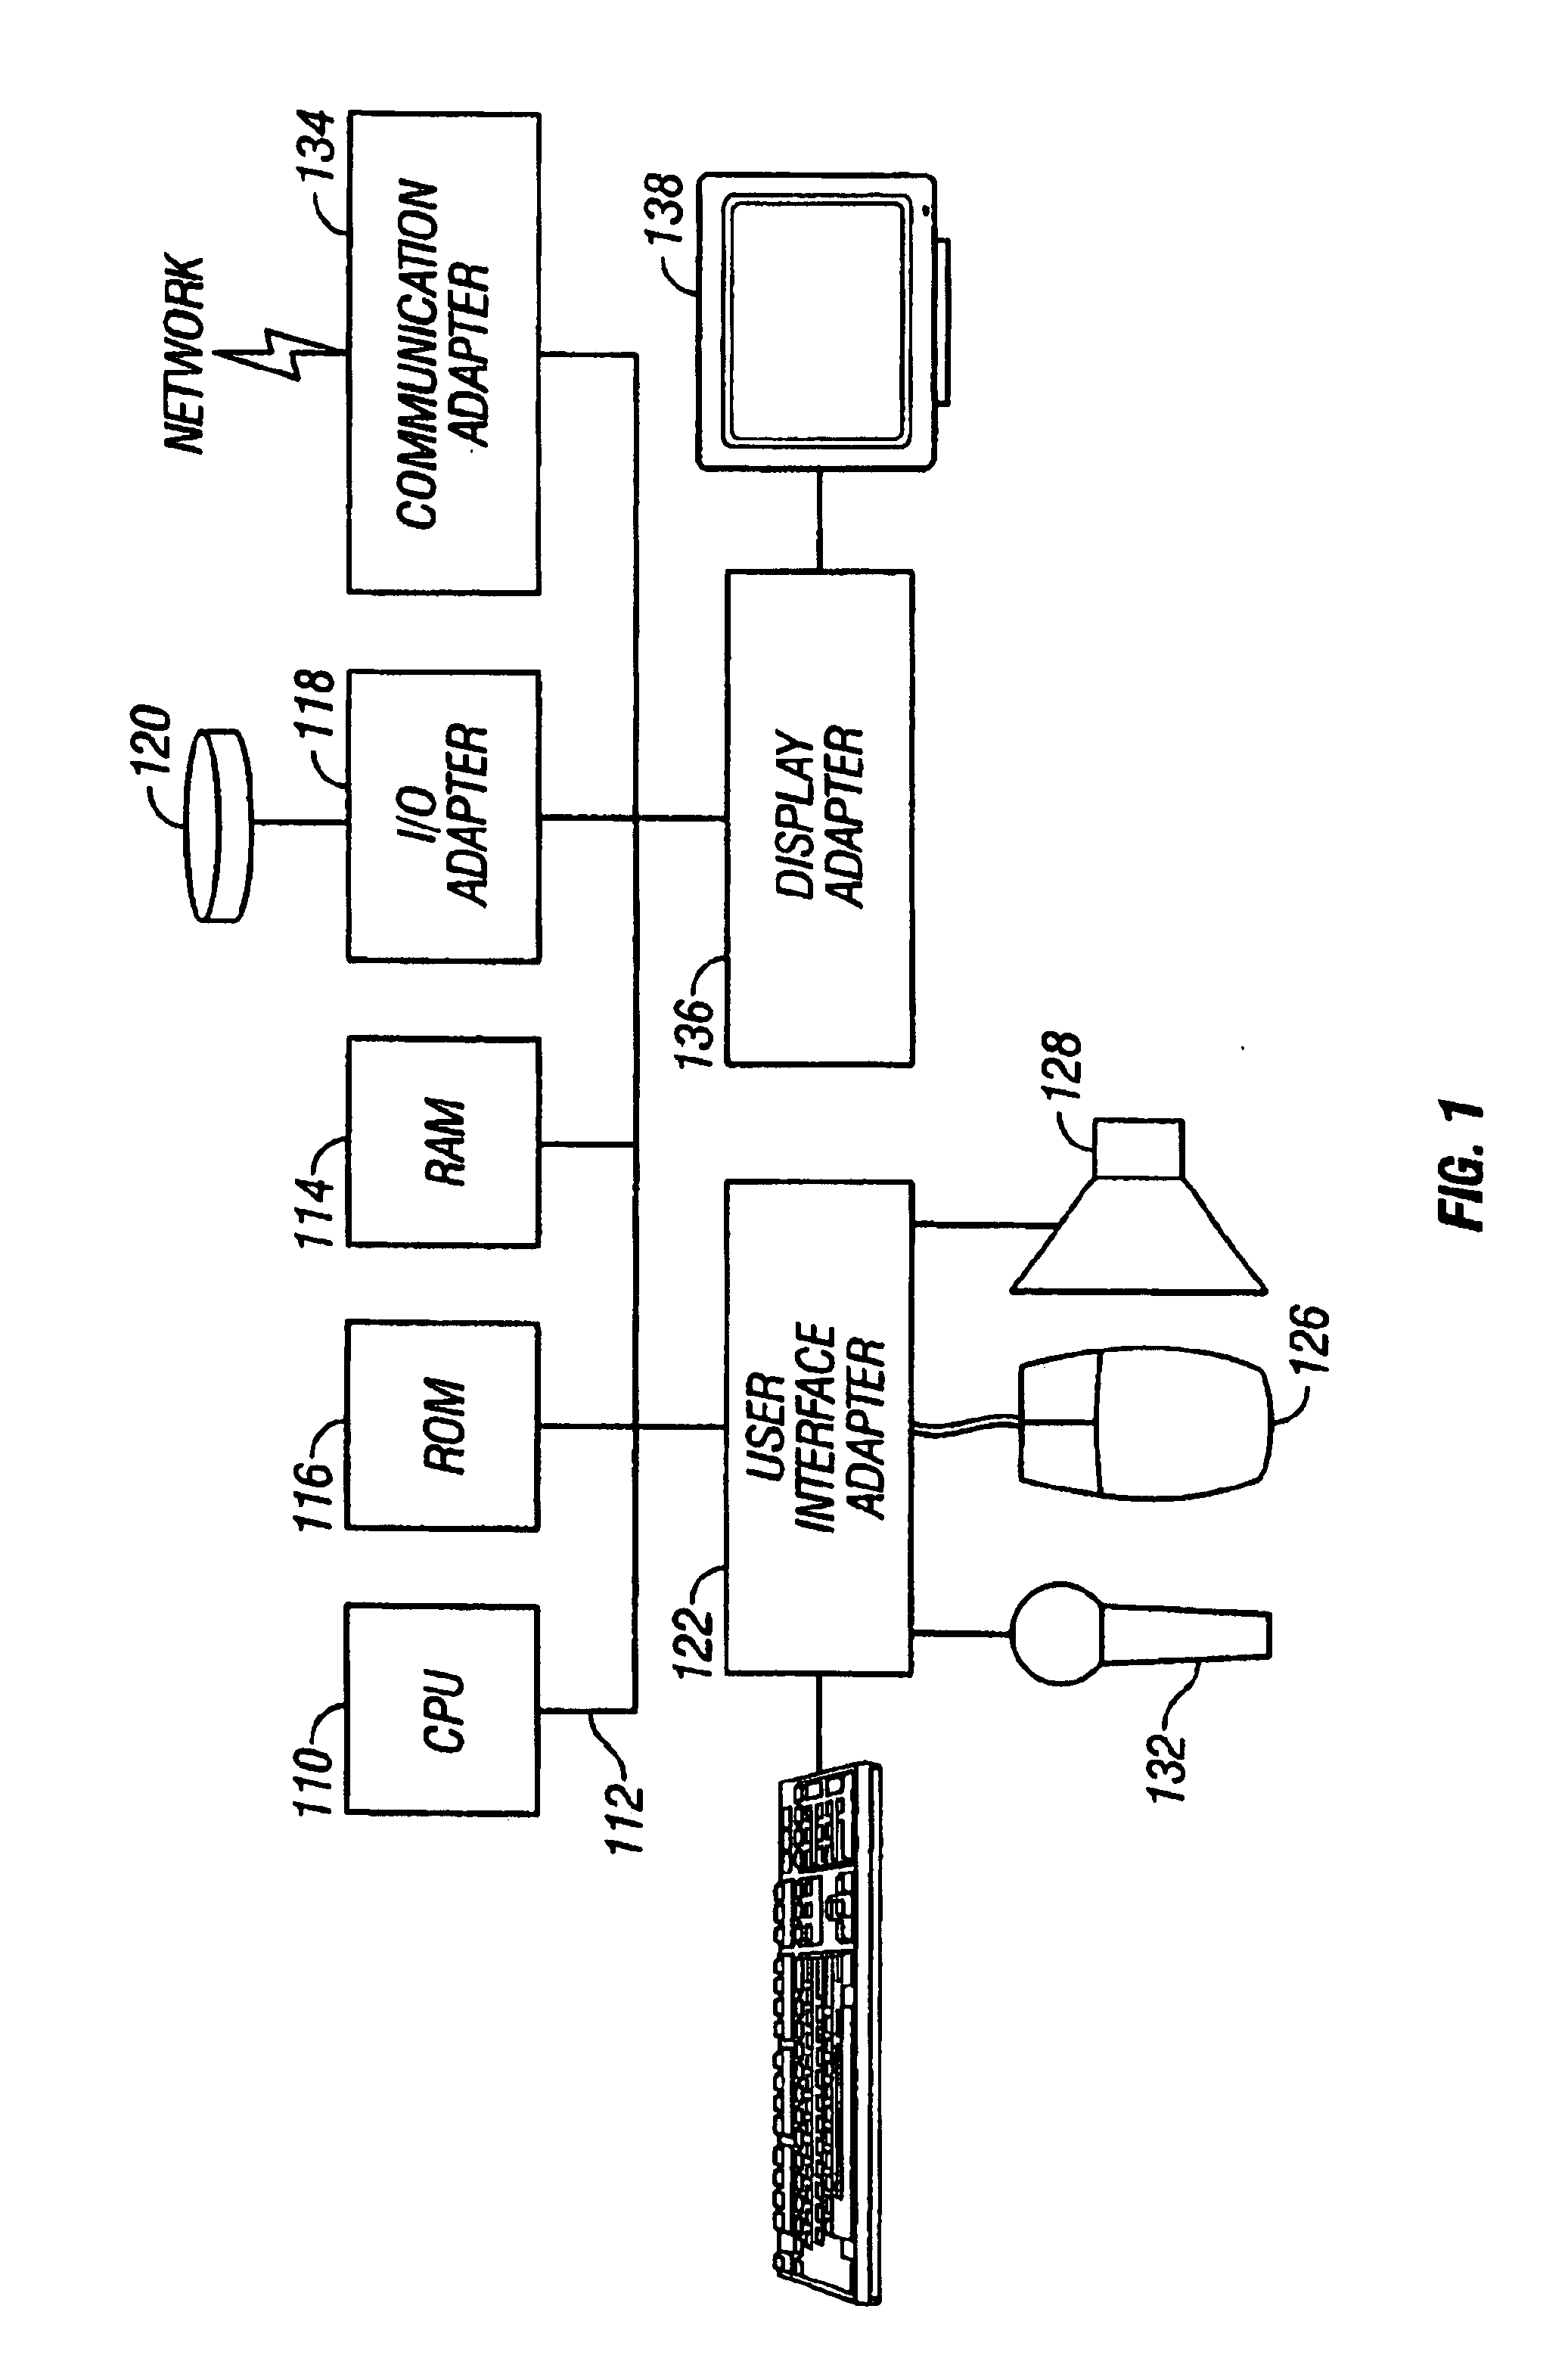 System, method and article of manufacturing for a runtime program analysis tool for a simulation engine